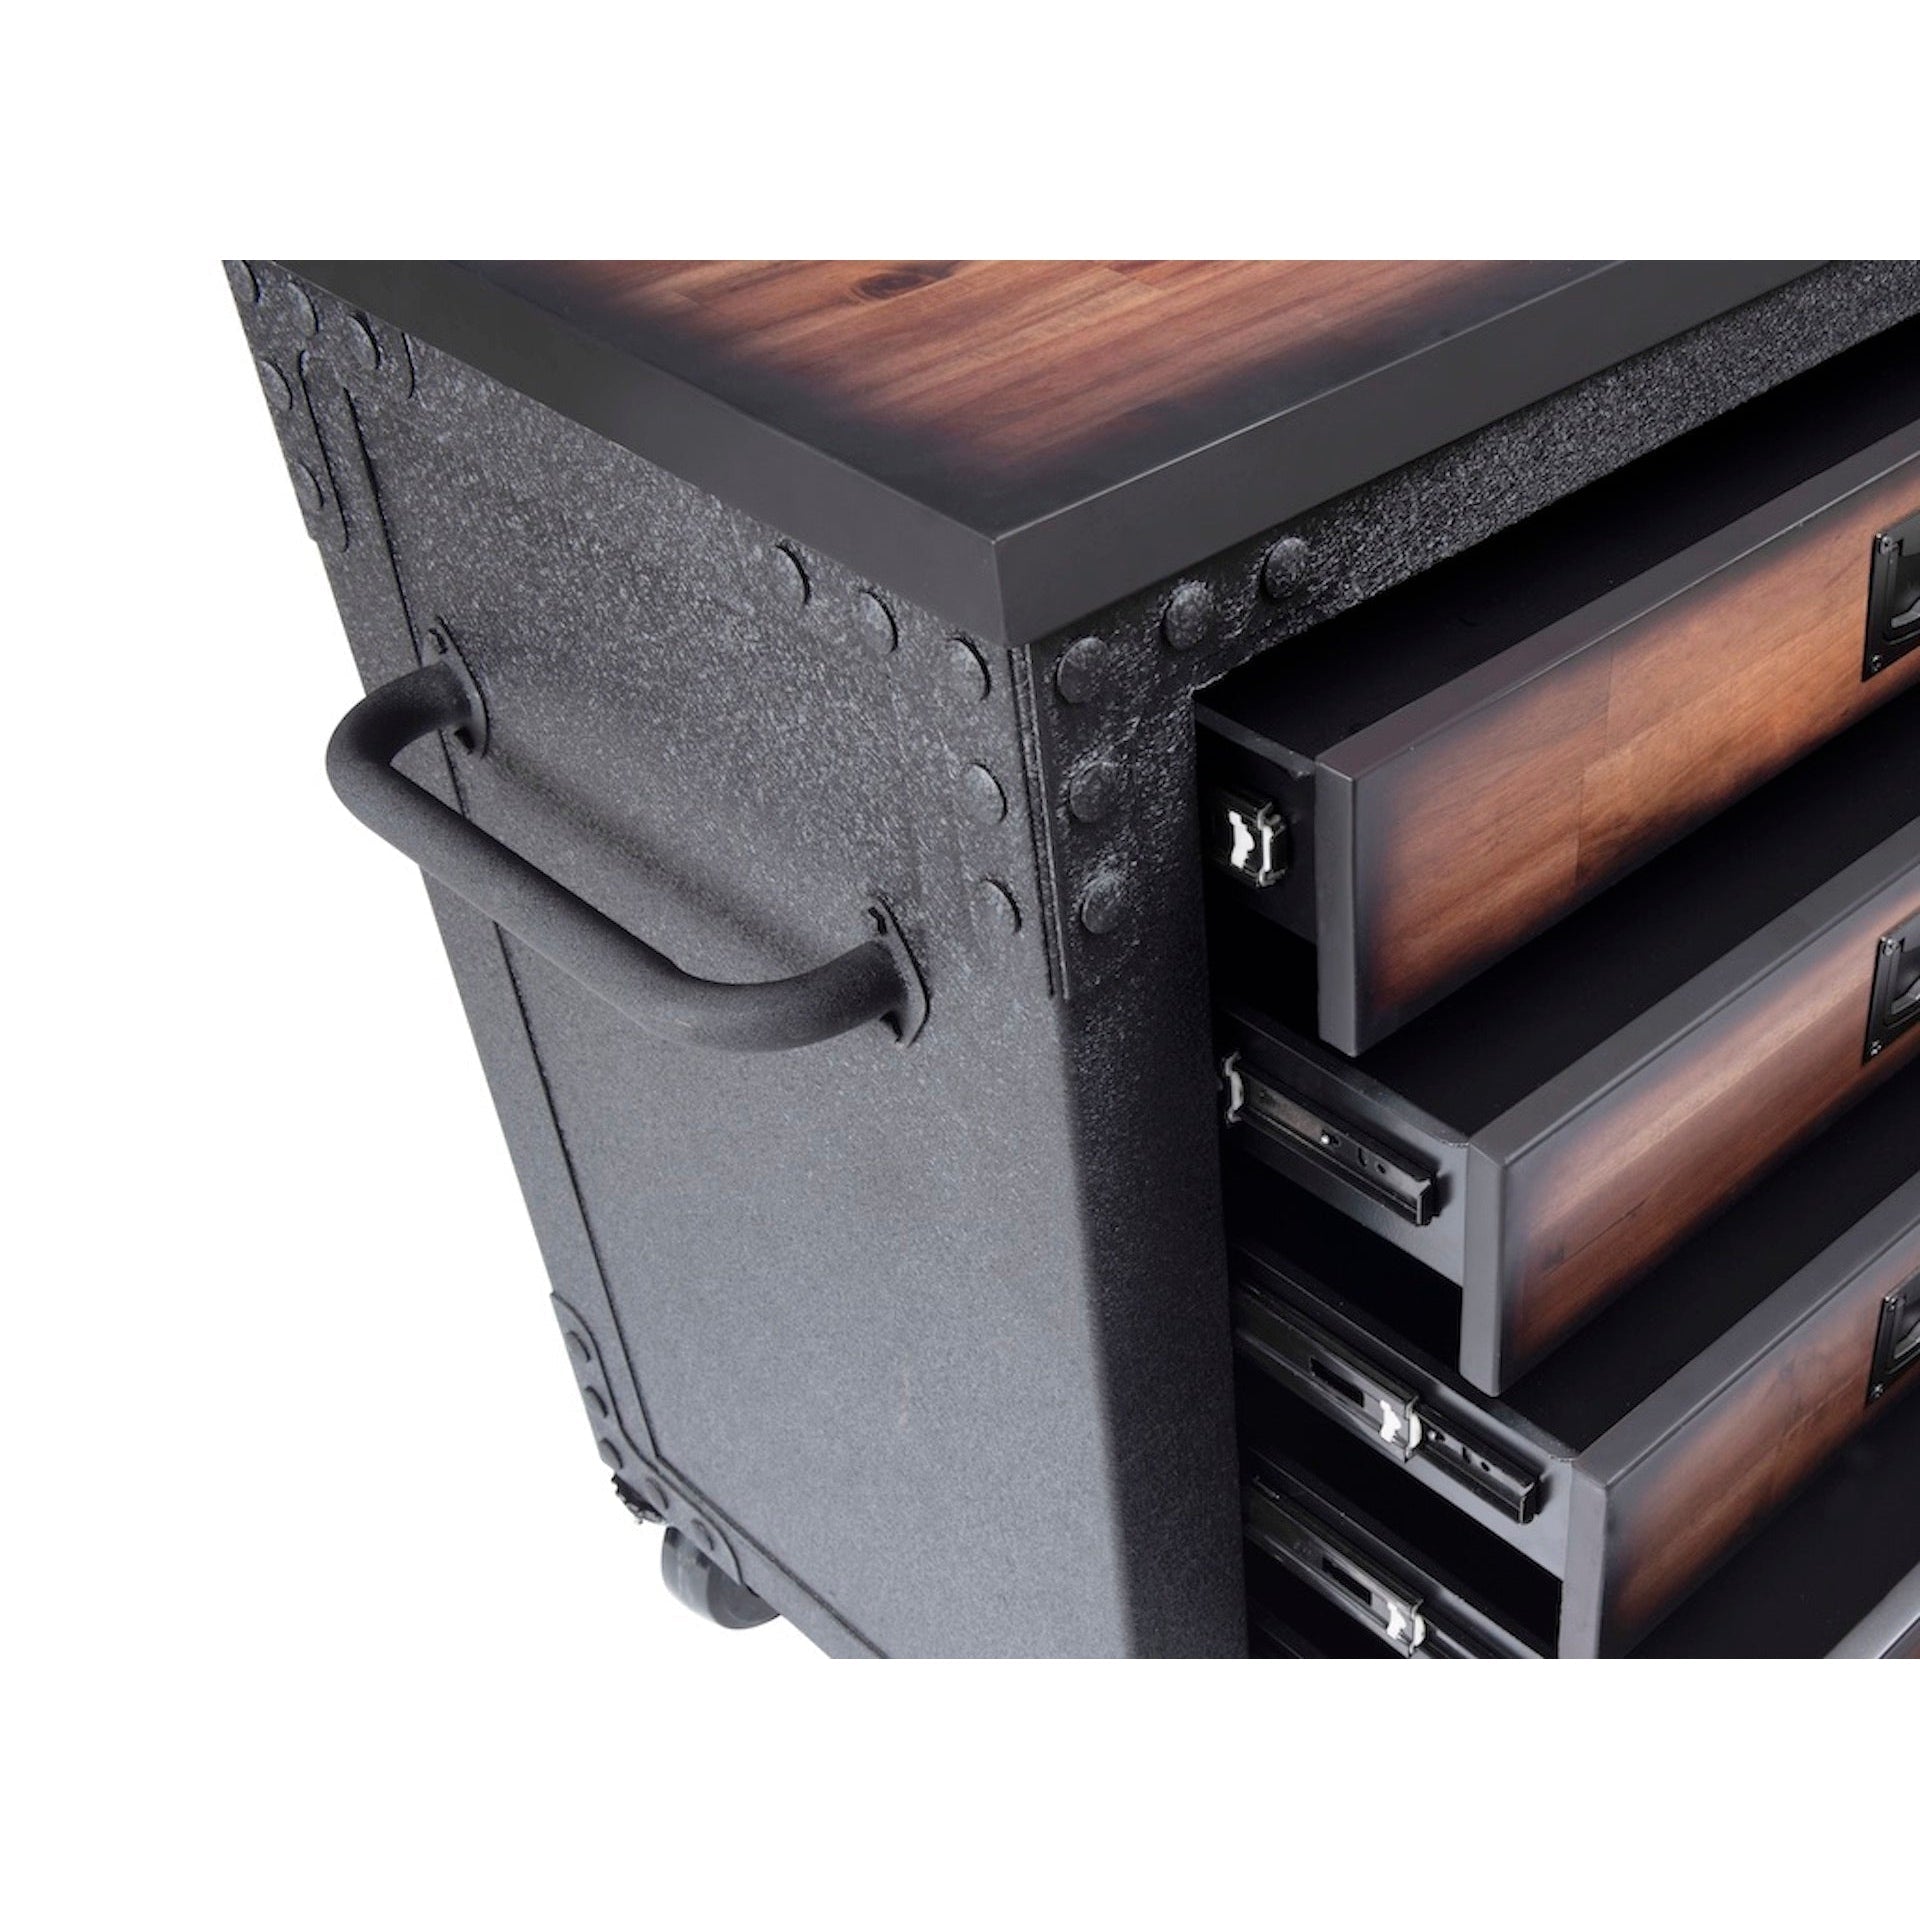 Duramax garage storage Duramax 48 in. 5-Drawers Rolling Tool Chest with Wood Top